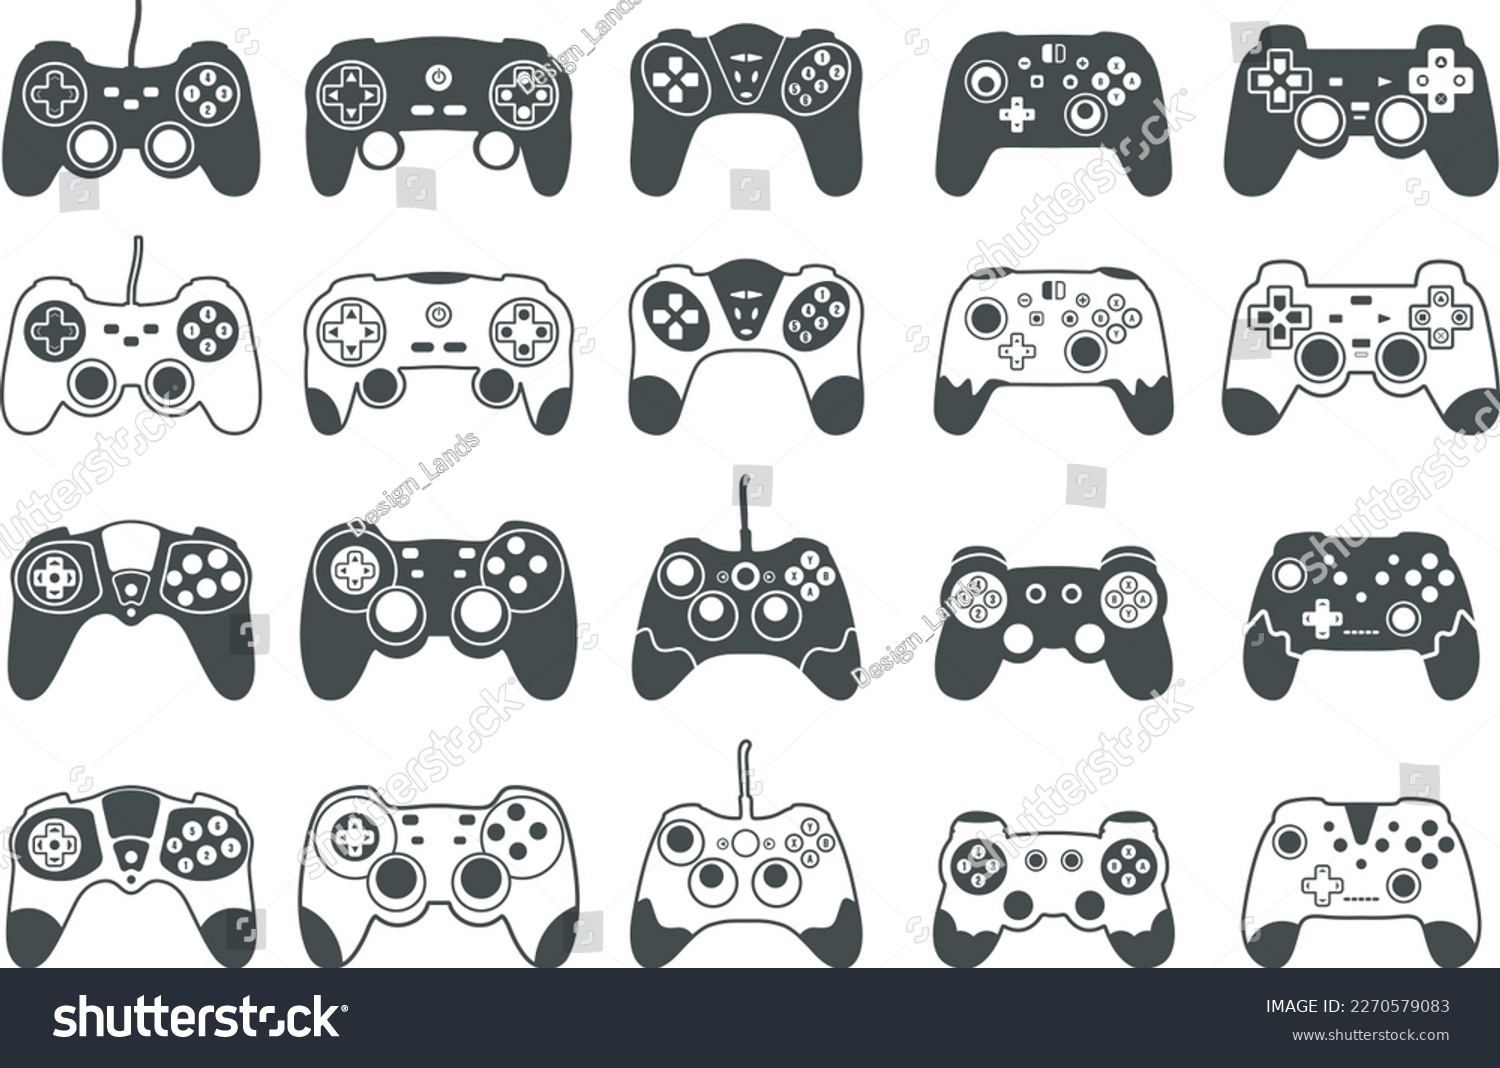 SVG of Game controller silhouette, Game Controller SVG, Video games joystick, Joypad SVG, playing device, Game console vector illustration. svg